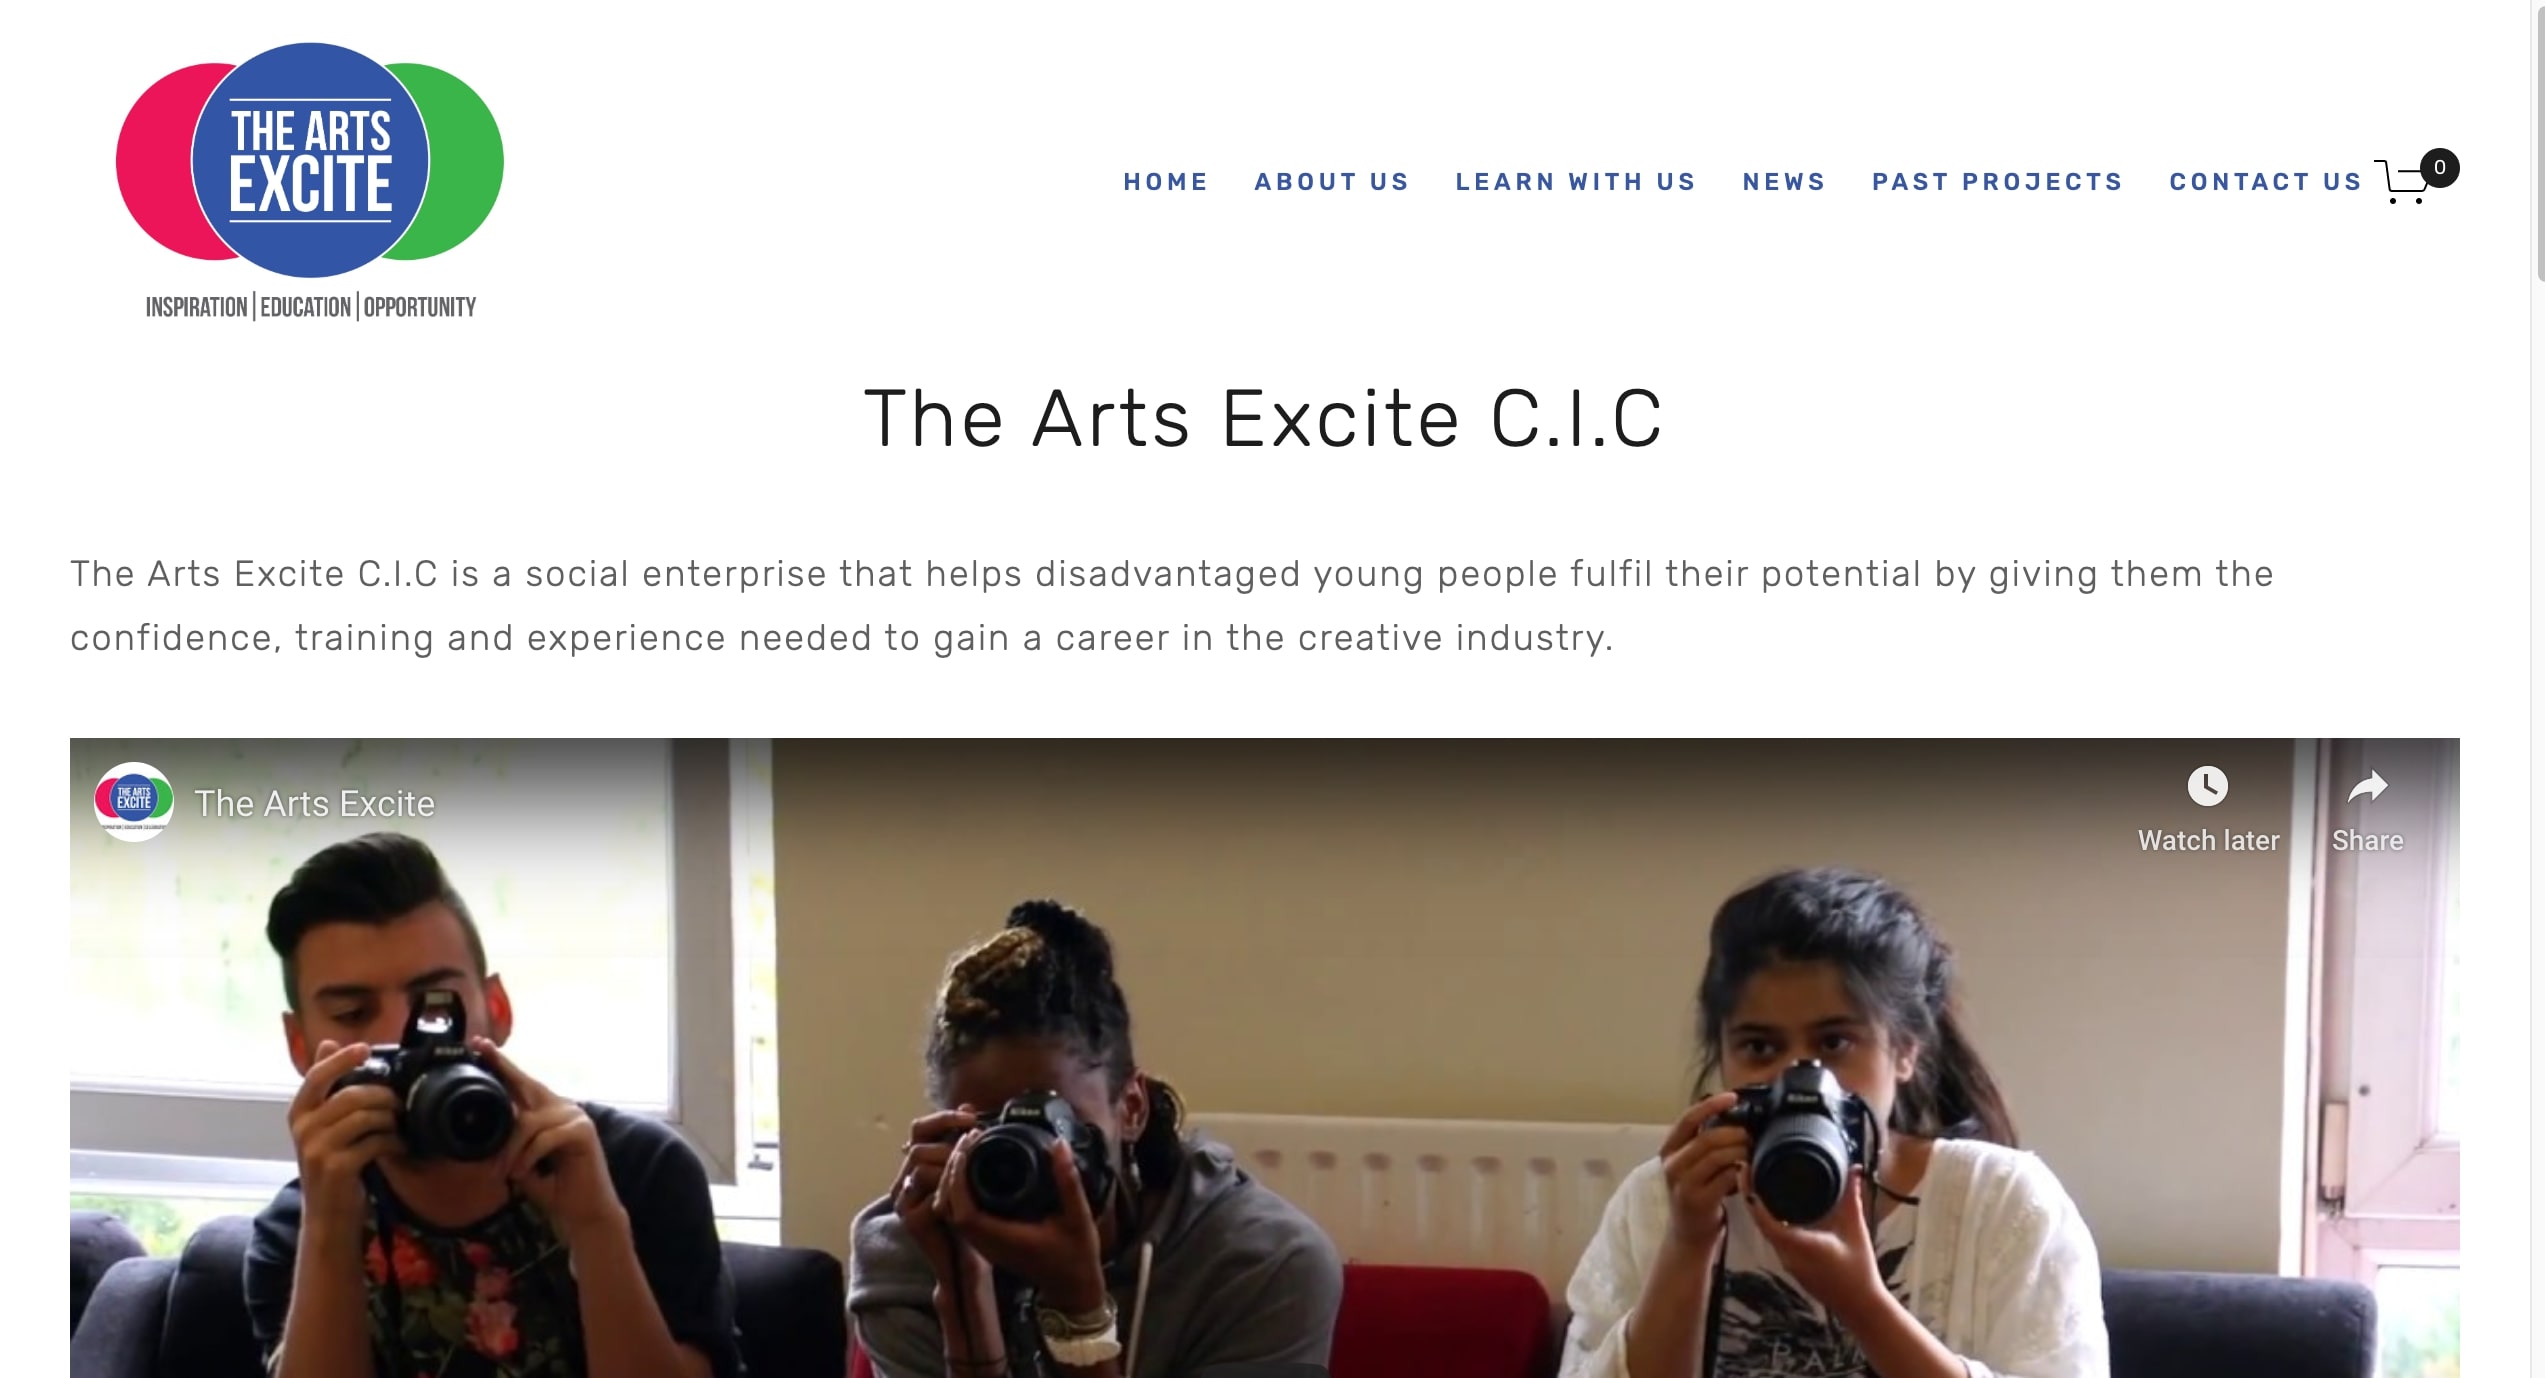 Arts Excite Main Website page which was built on a tight client budget